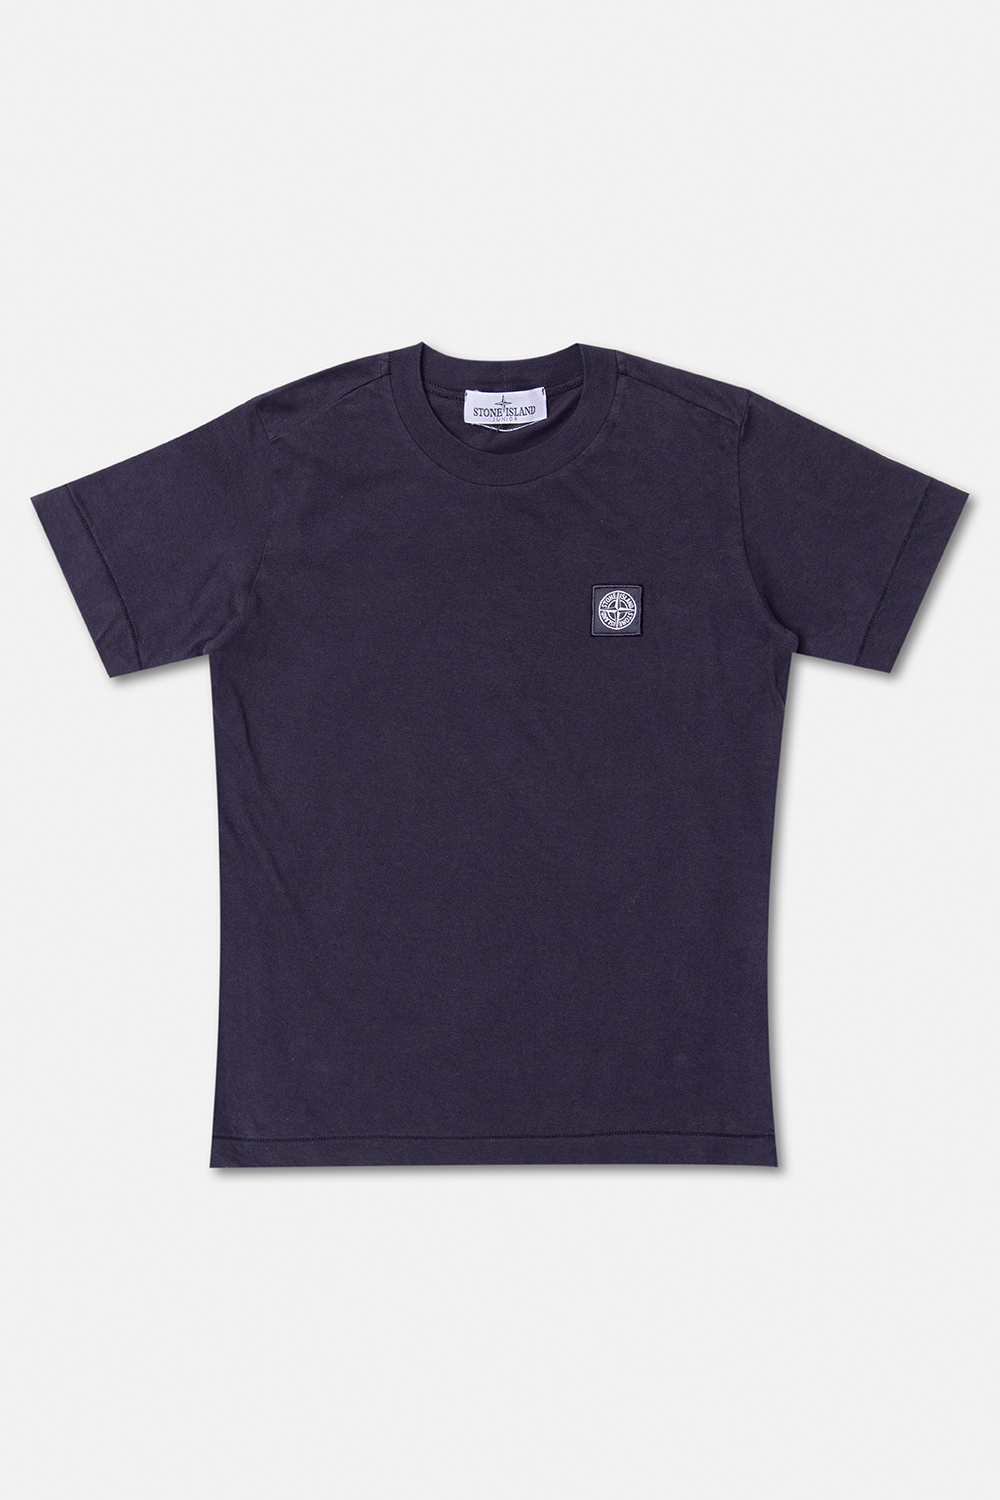 Stone Island Kids Patched T-shirt